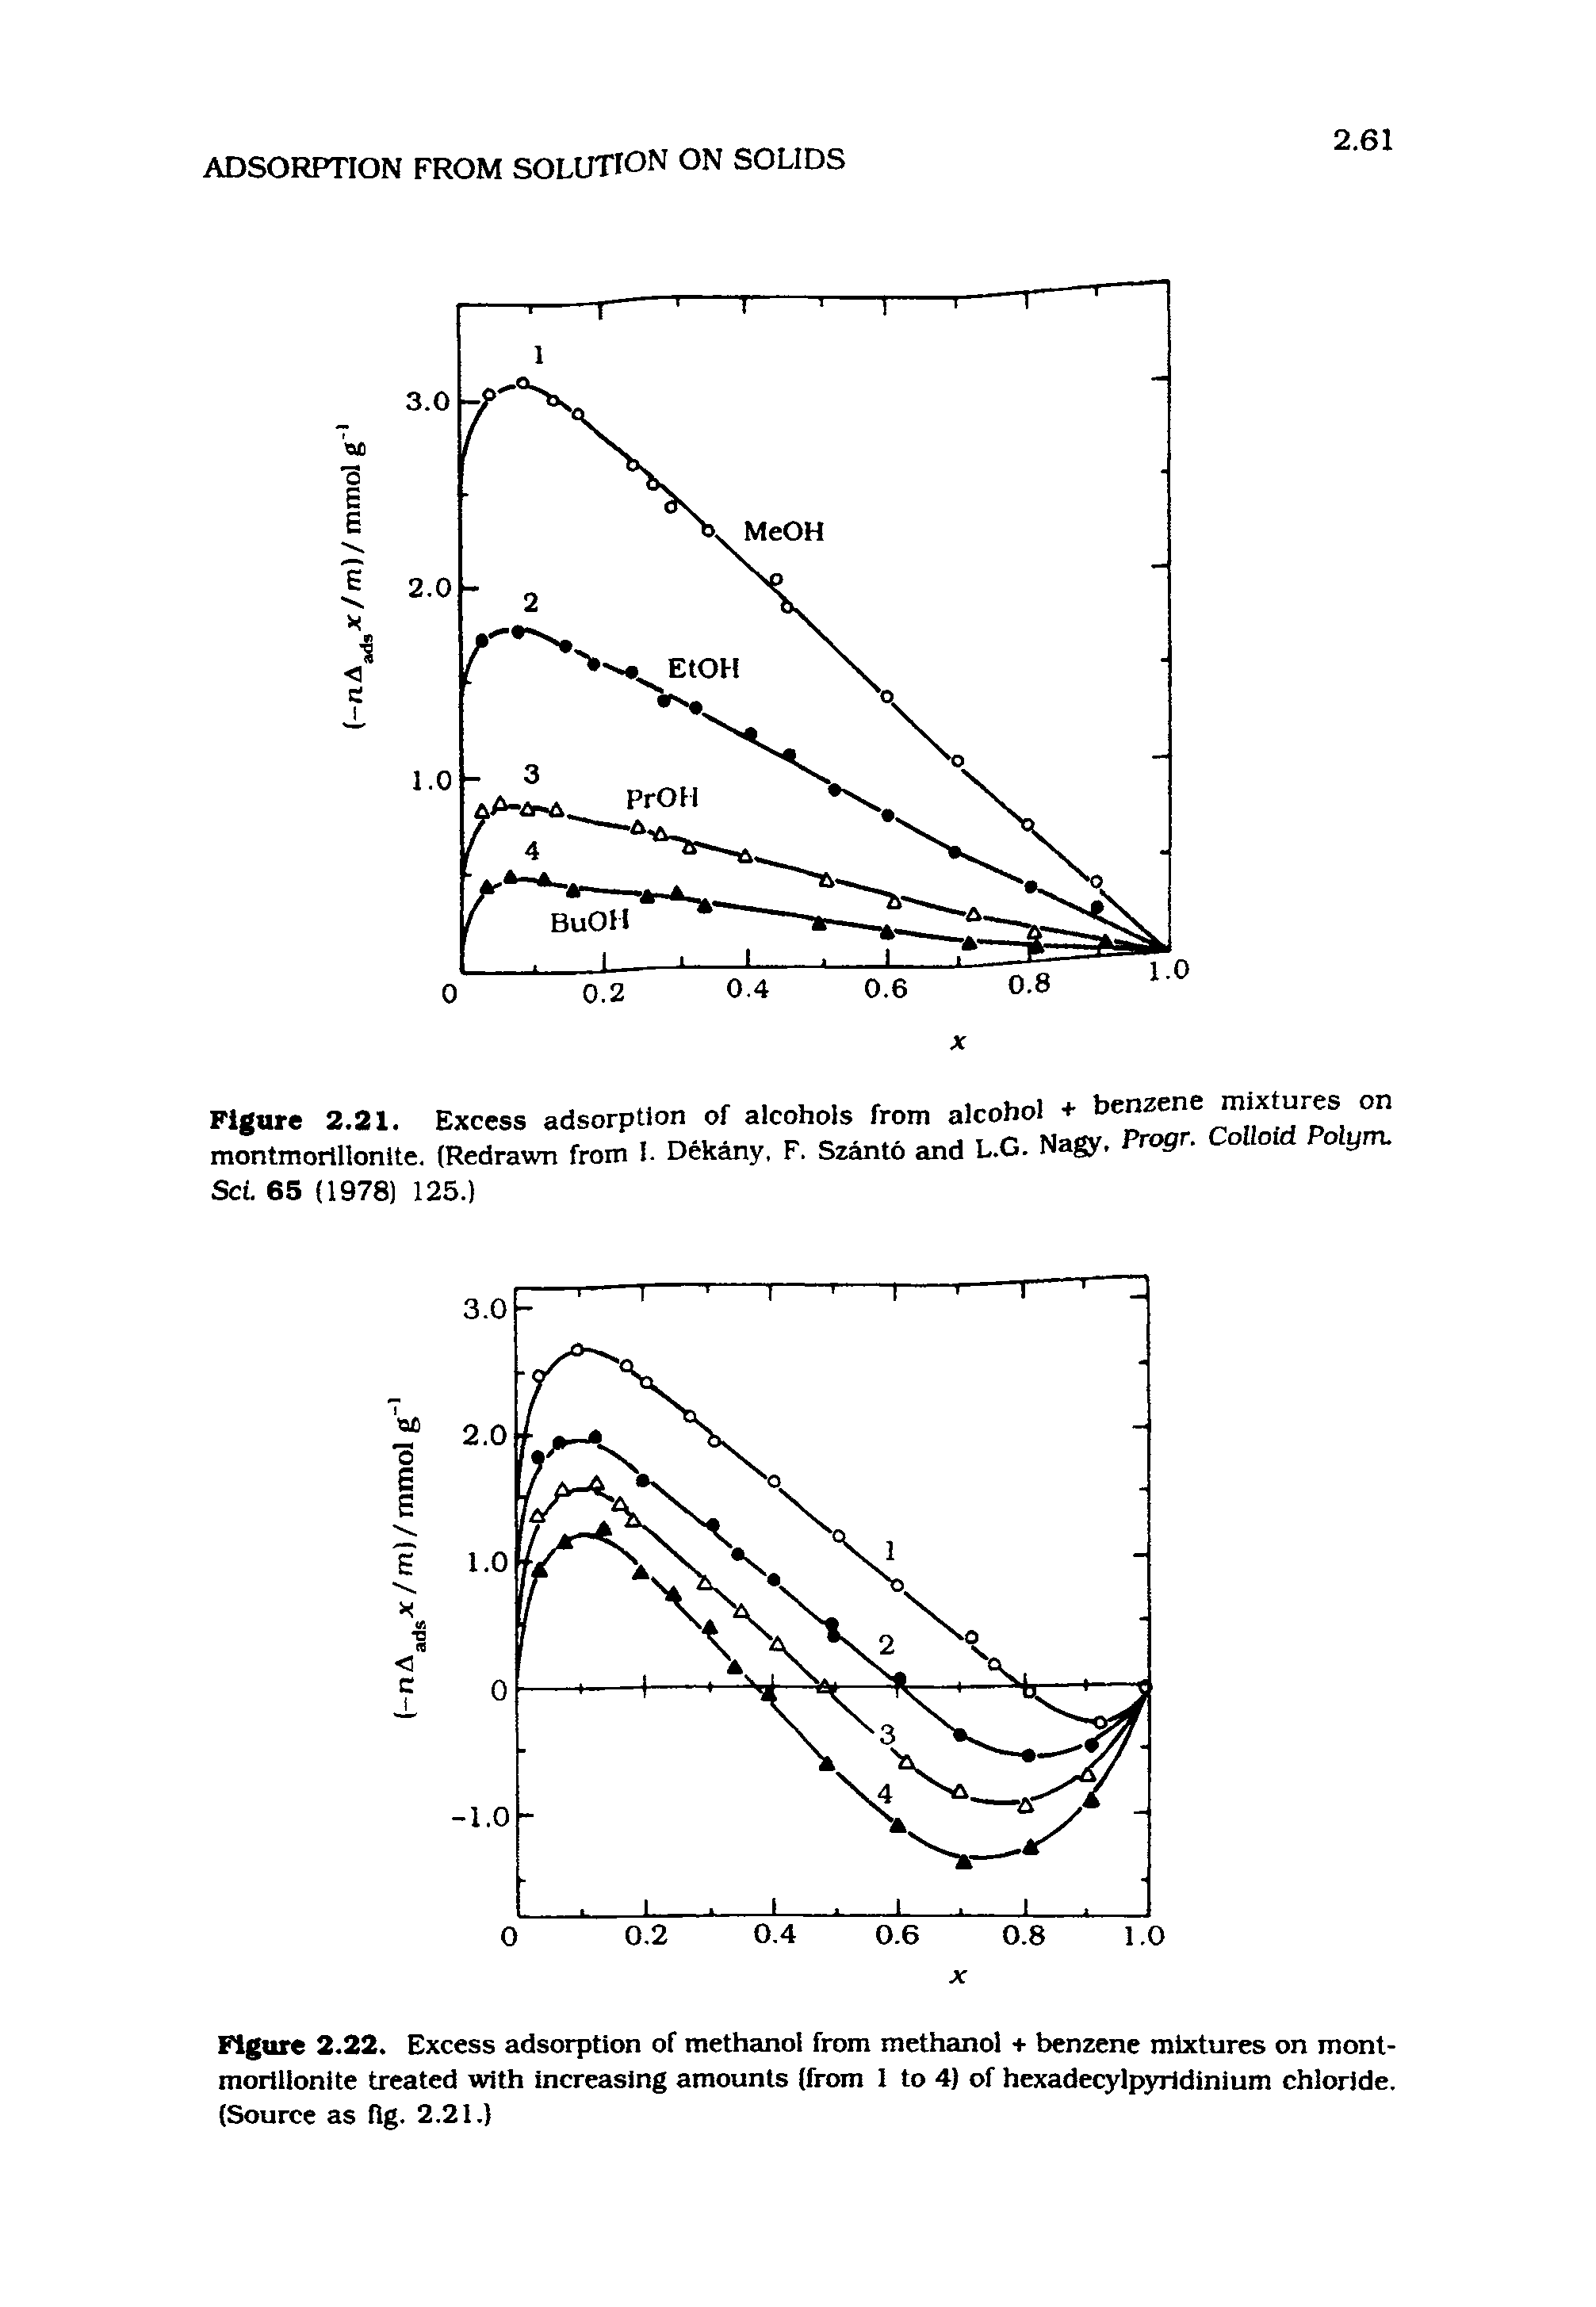 Figure 2.21. Excess adsorption of alcohols from alcohol + benzene mixtures on montmorillonite. (Redrawn from I- Dek y, F. Sz to and L.G. Nagy. Progr. Colloid Polym. Sci. 65 (1978) 125.)...